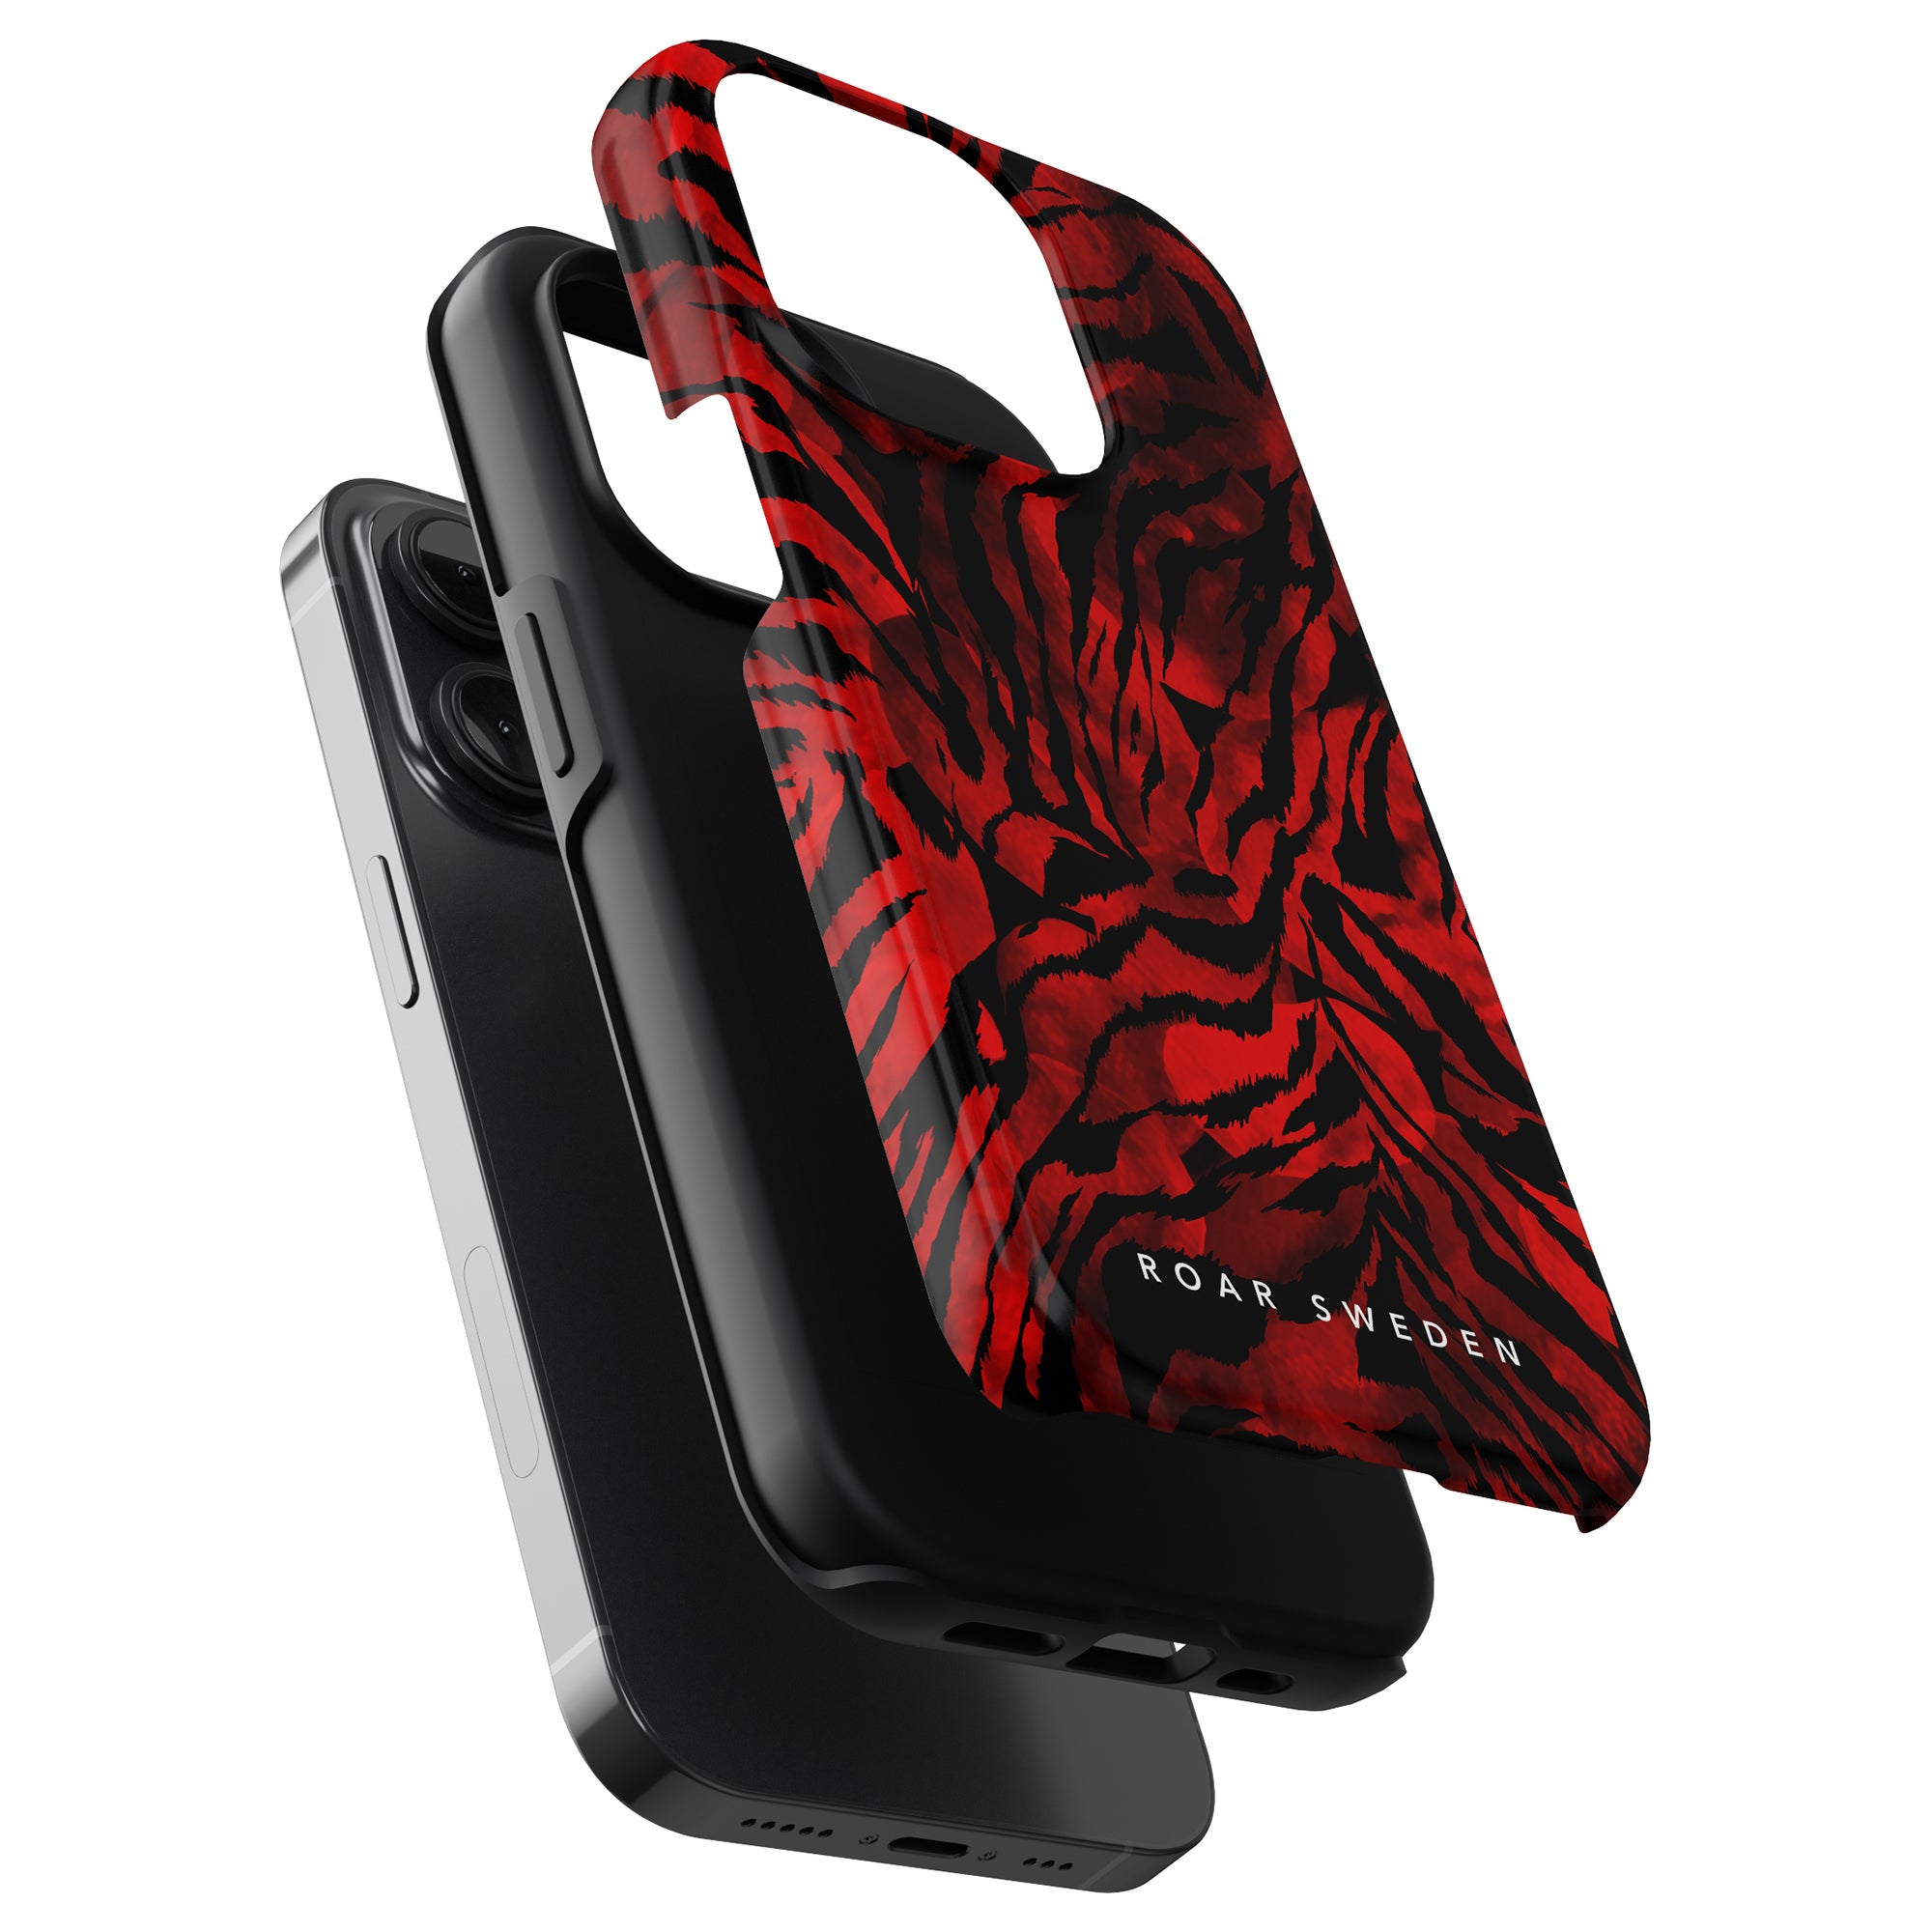 A vibrant Blood Tiger - Tough Case in a striking combination of red and black designed specifically for the iPhone 11 Pro.